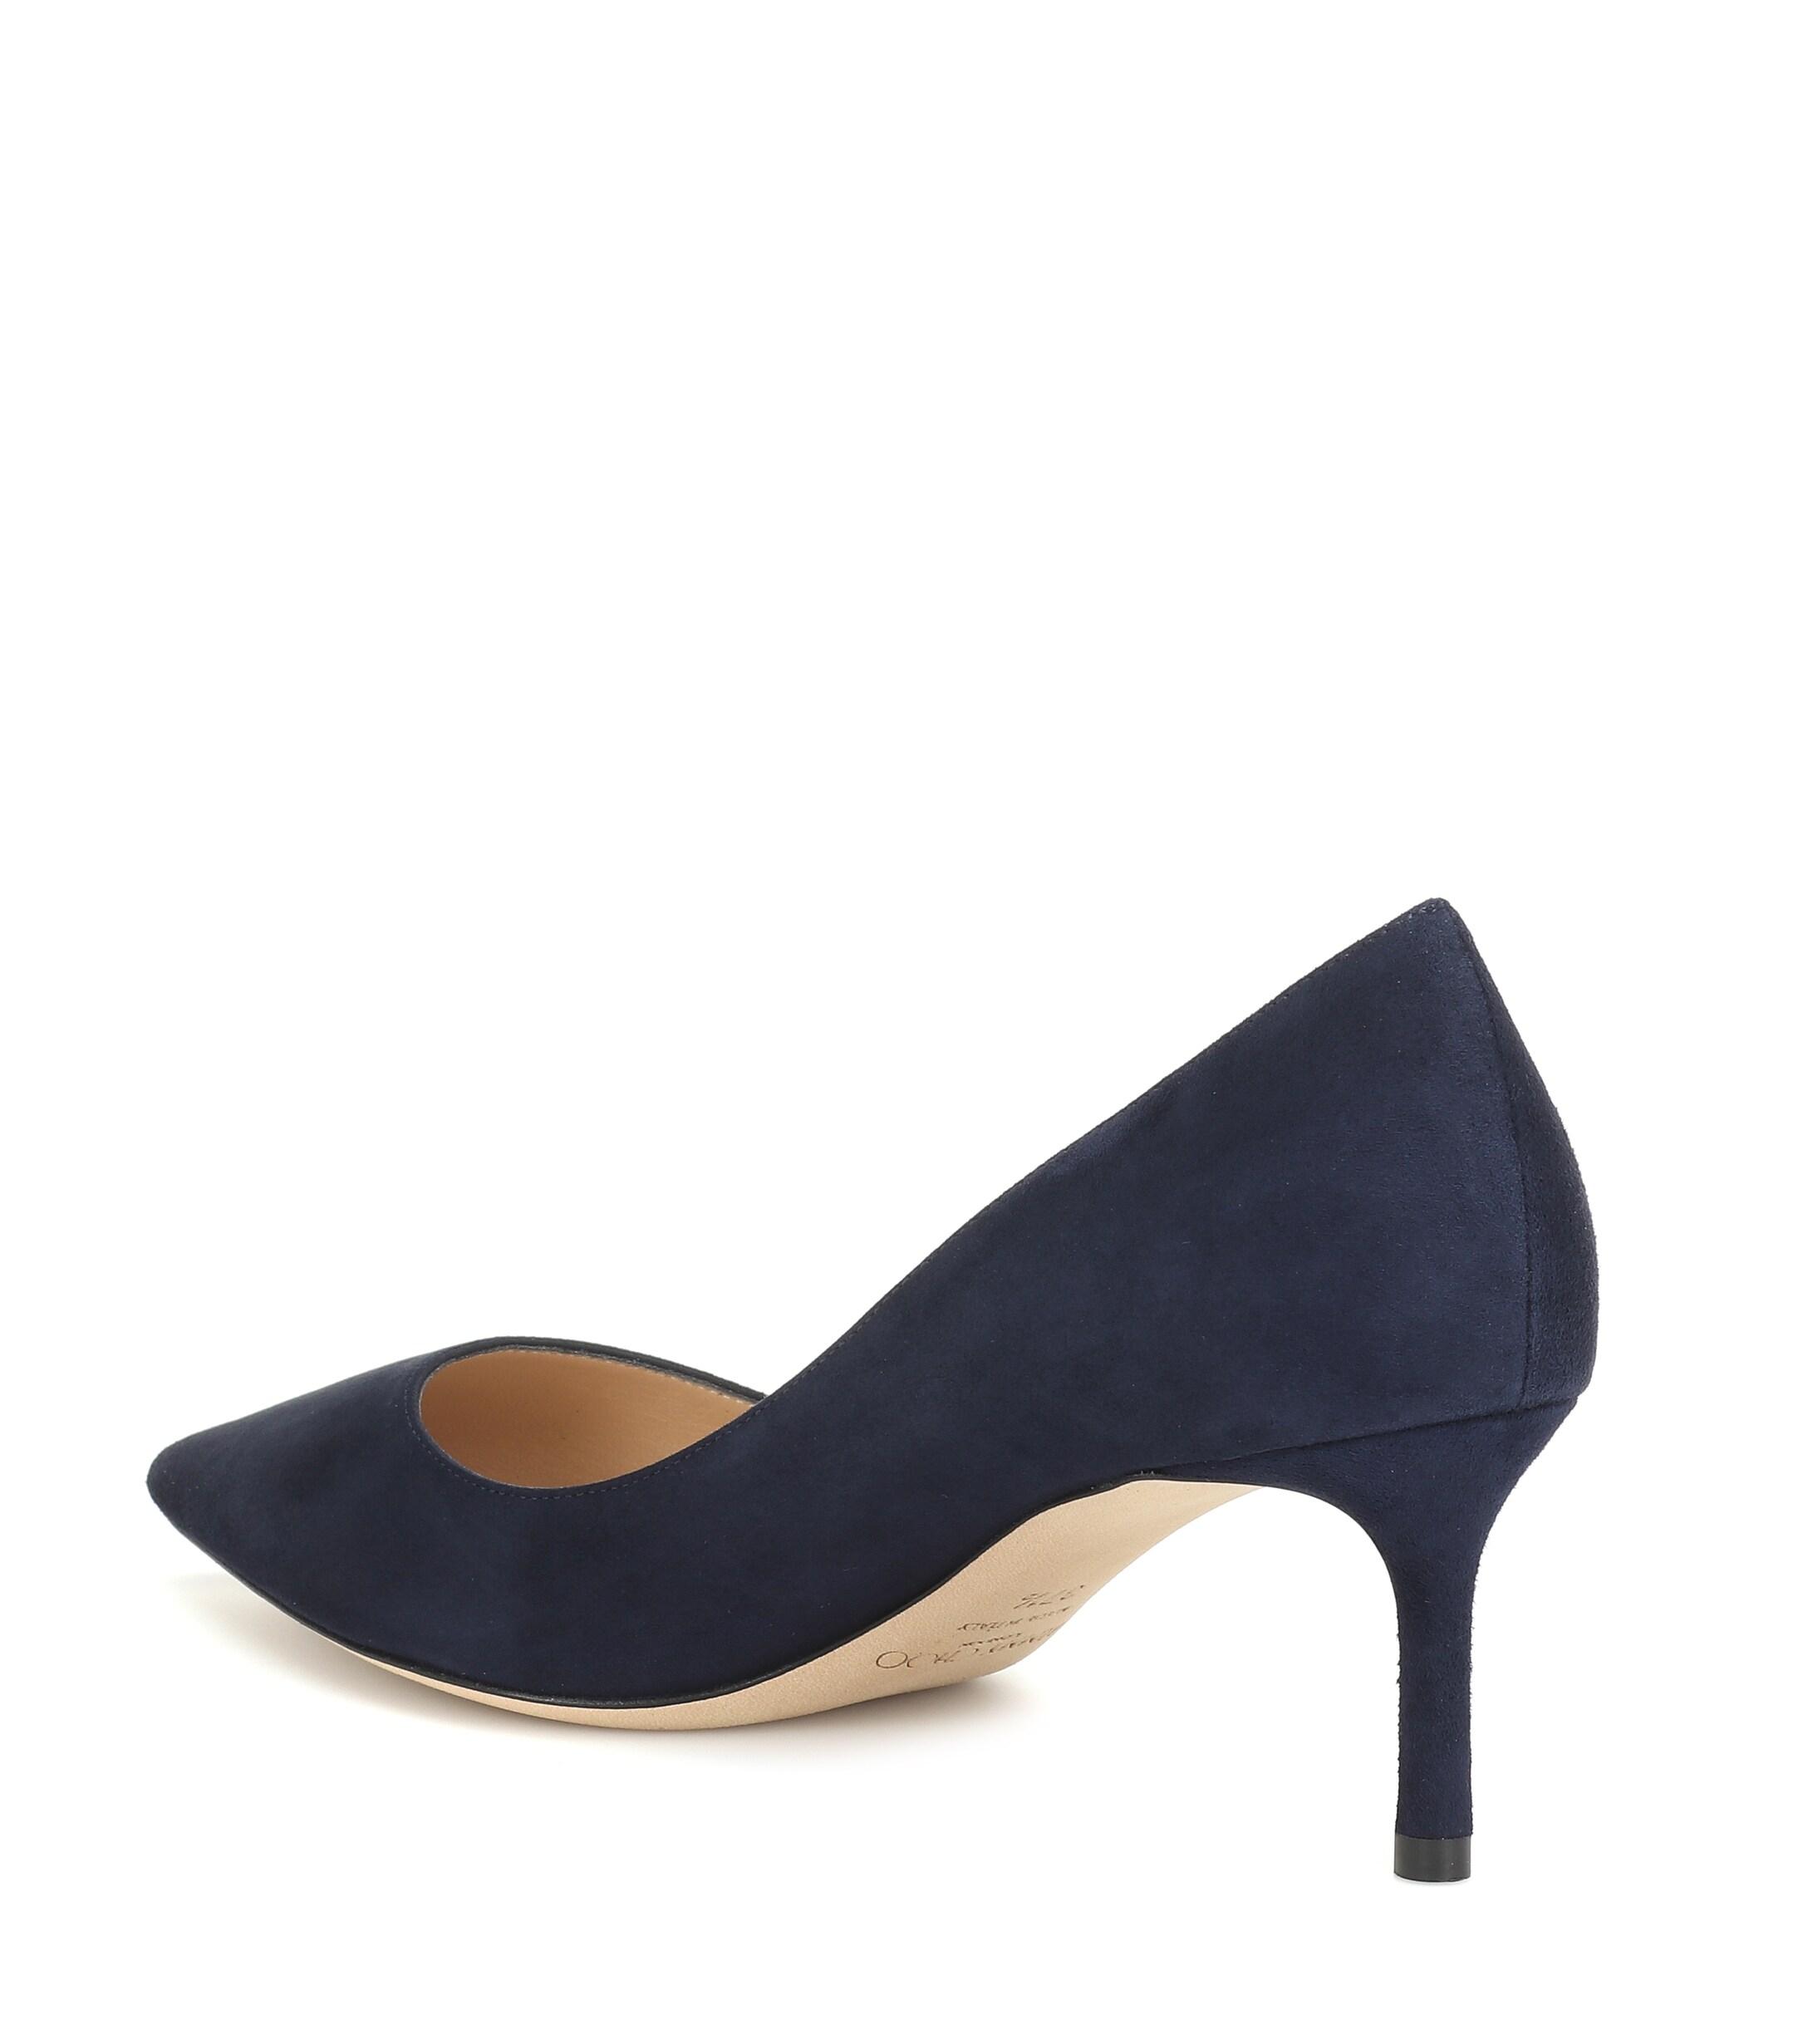 Jimmy Choo Anouk Suede Pumps in Navy (Blue) - Save 63% - Lyst